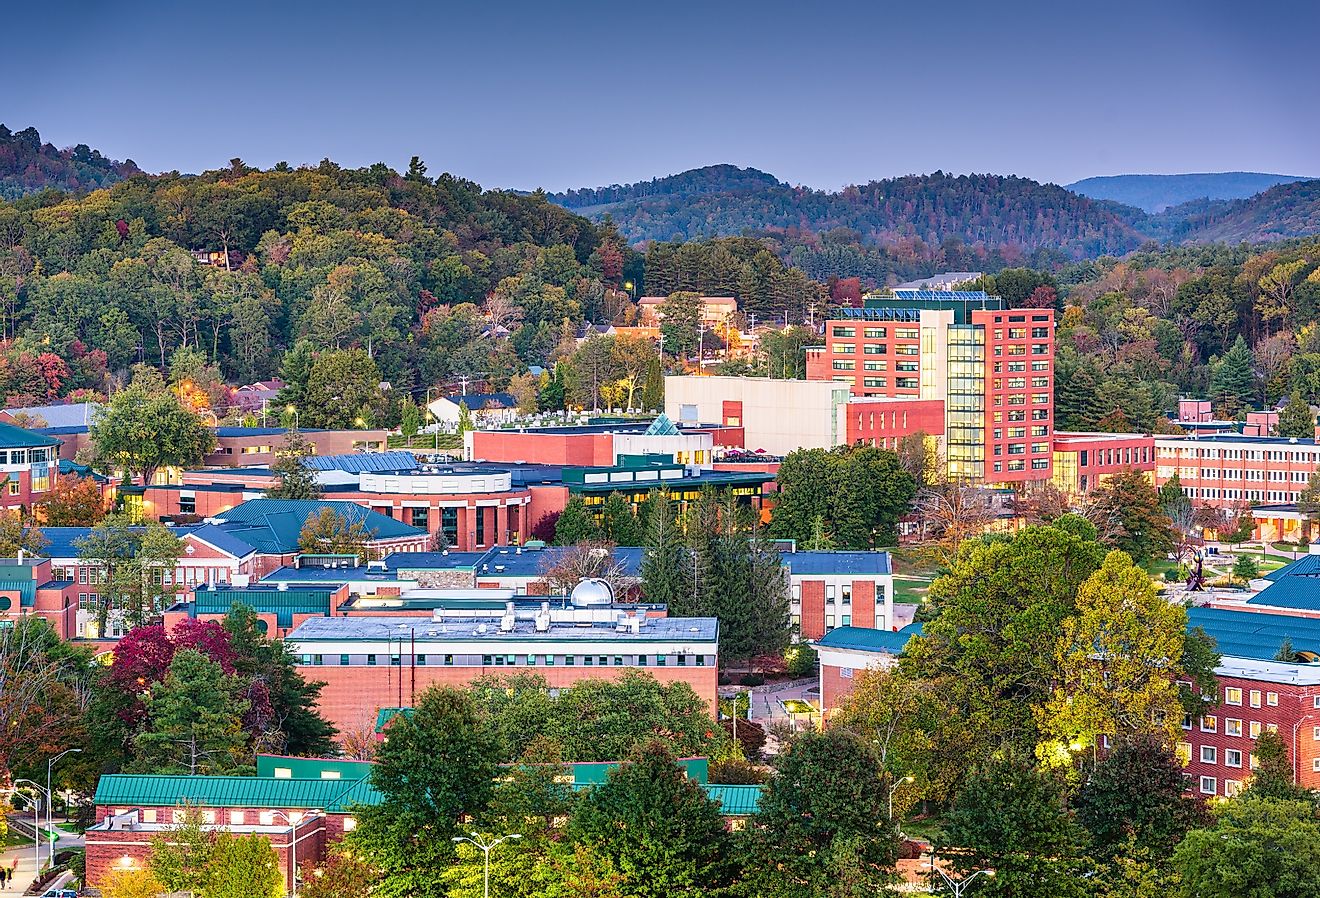 Boone, North Carolina, campus and town skyline at twilight.